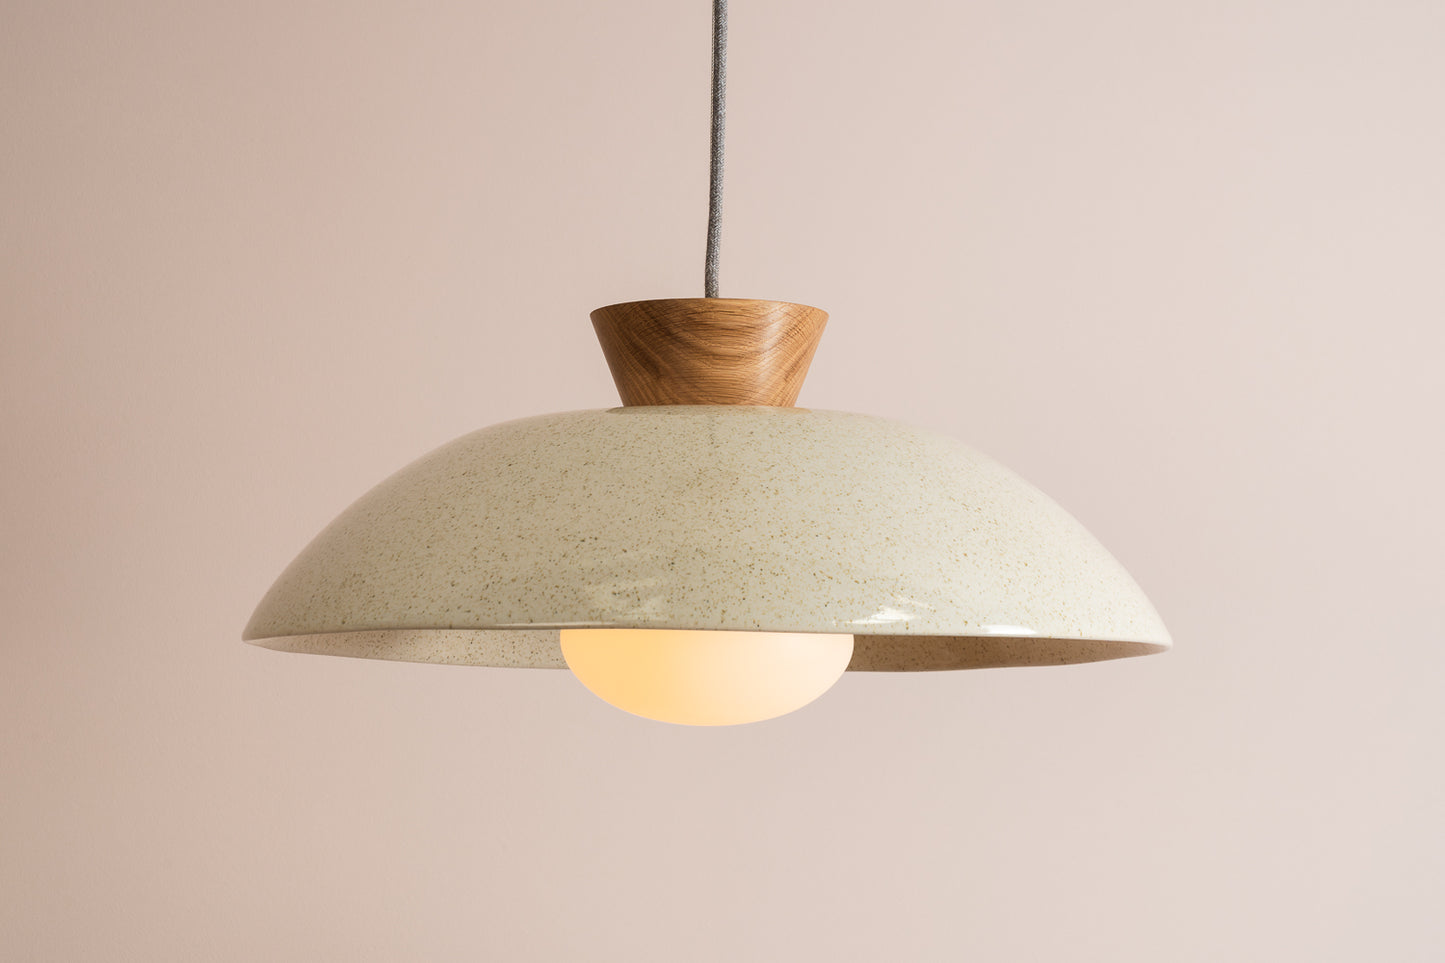 XL Dawn Pendant Light in Ceramic and Oak [OUTLET]